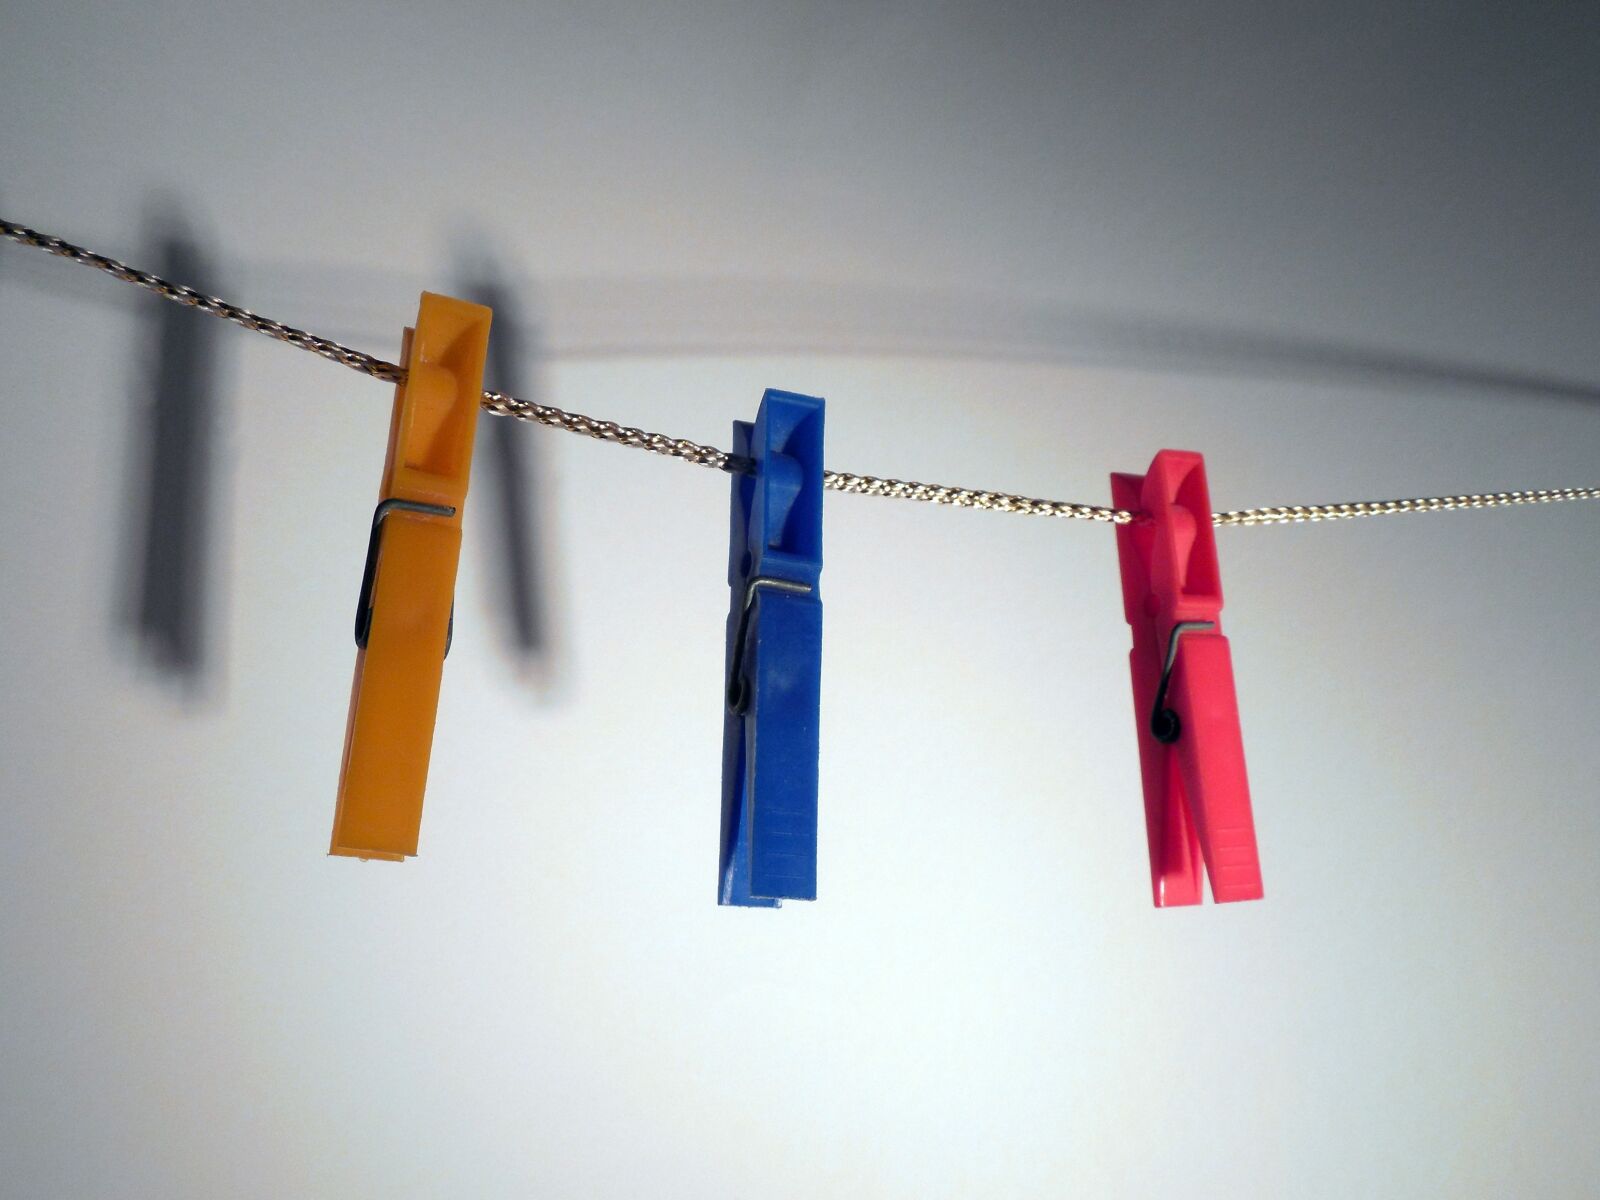 Nikon COOLPIX L620 sample photo. Clamp, clothespins, laundry photography